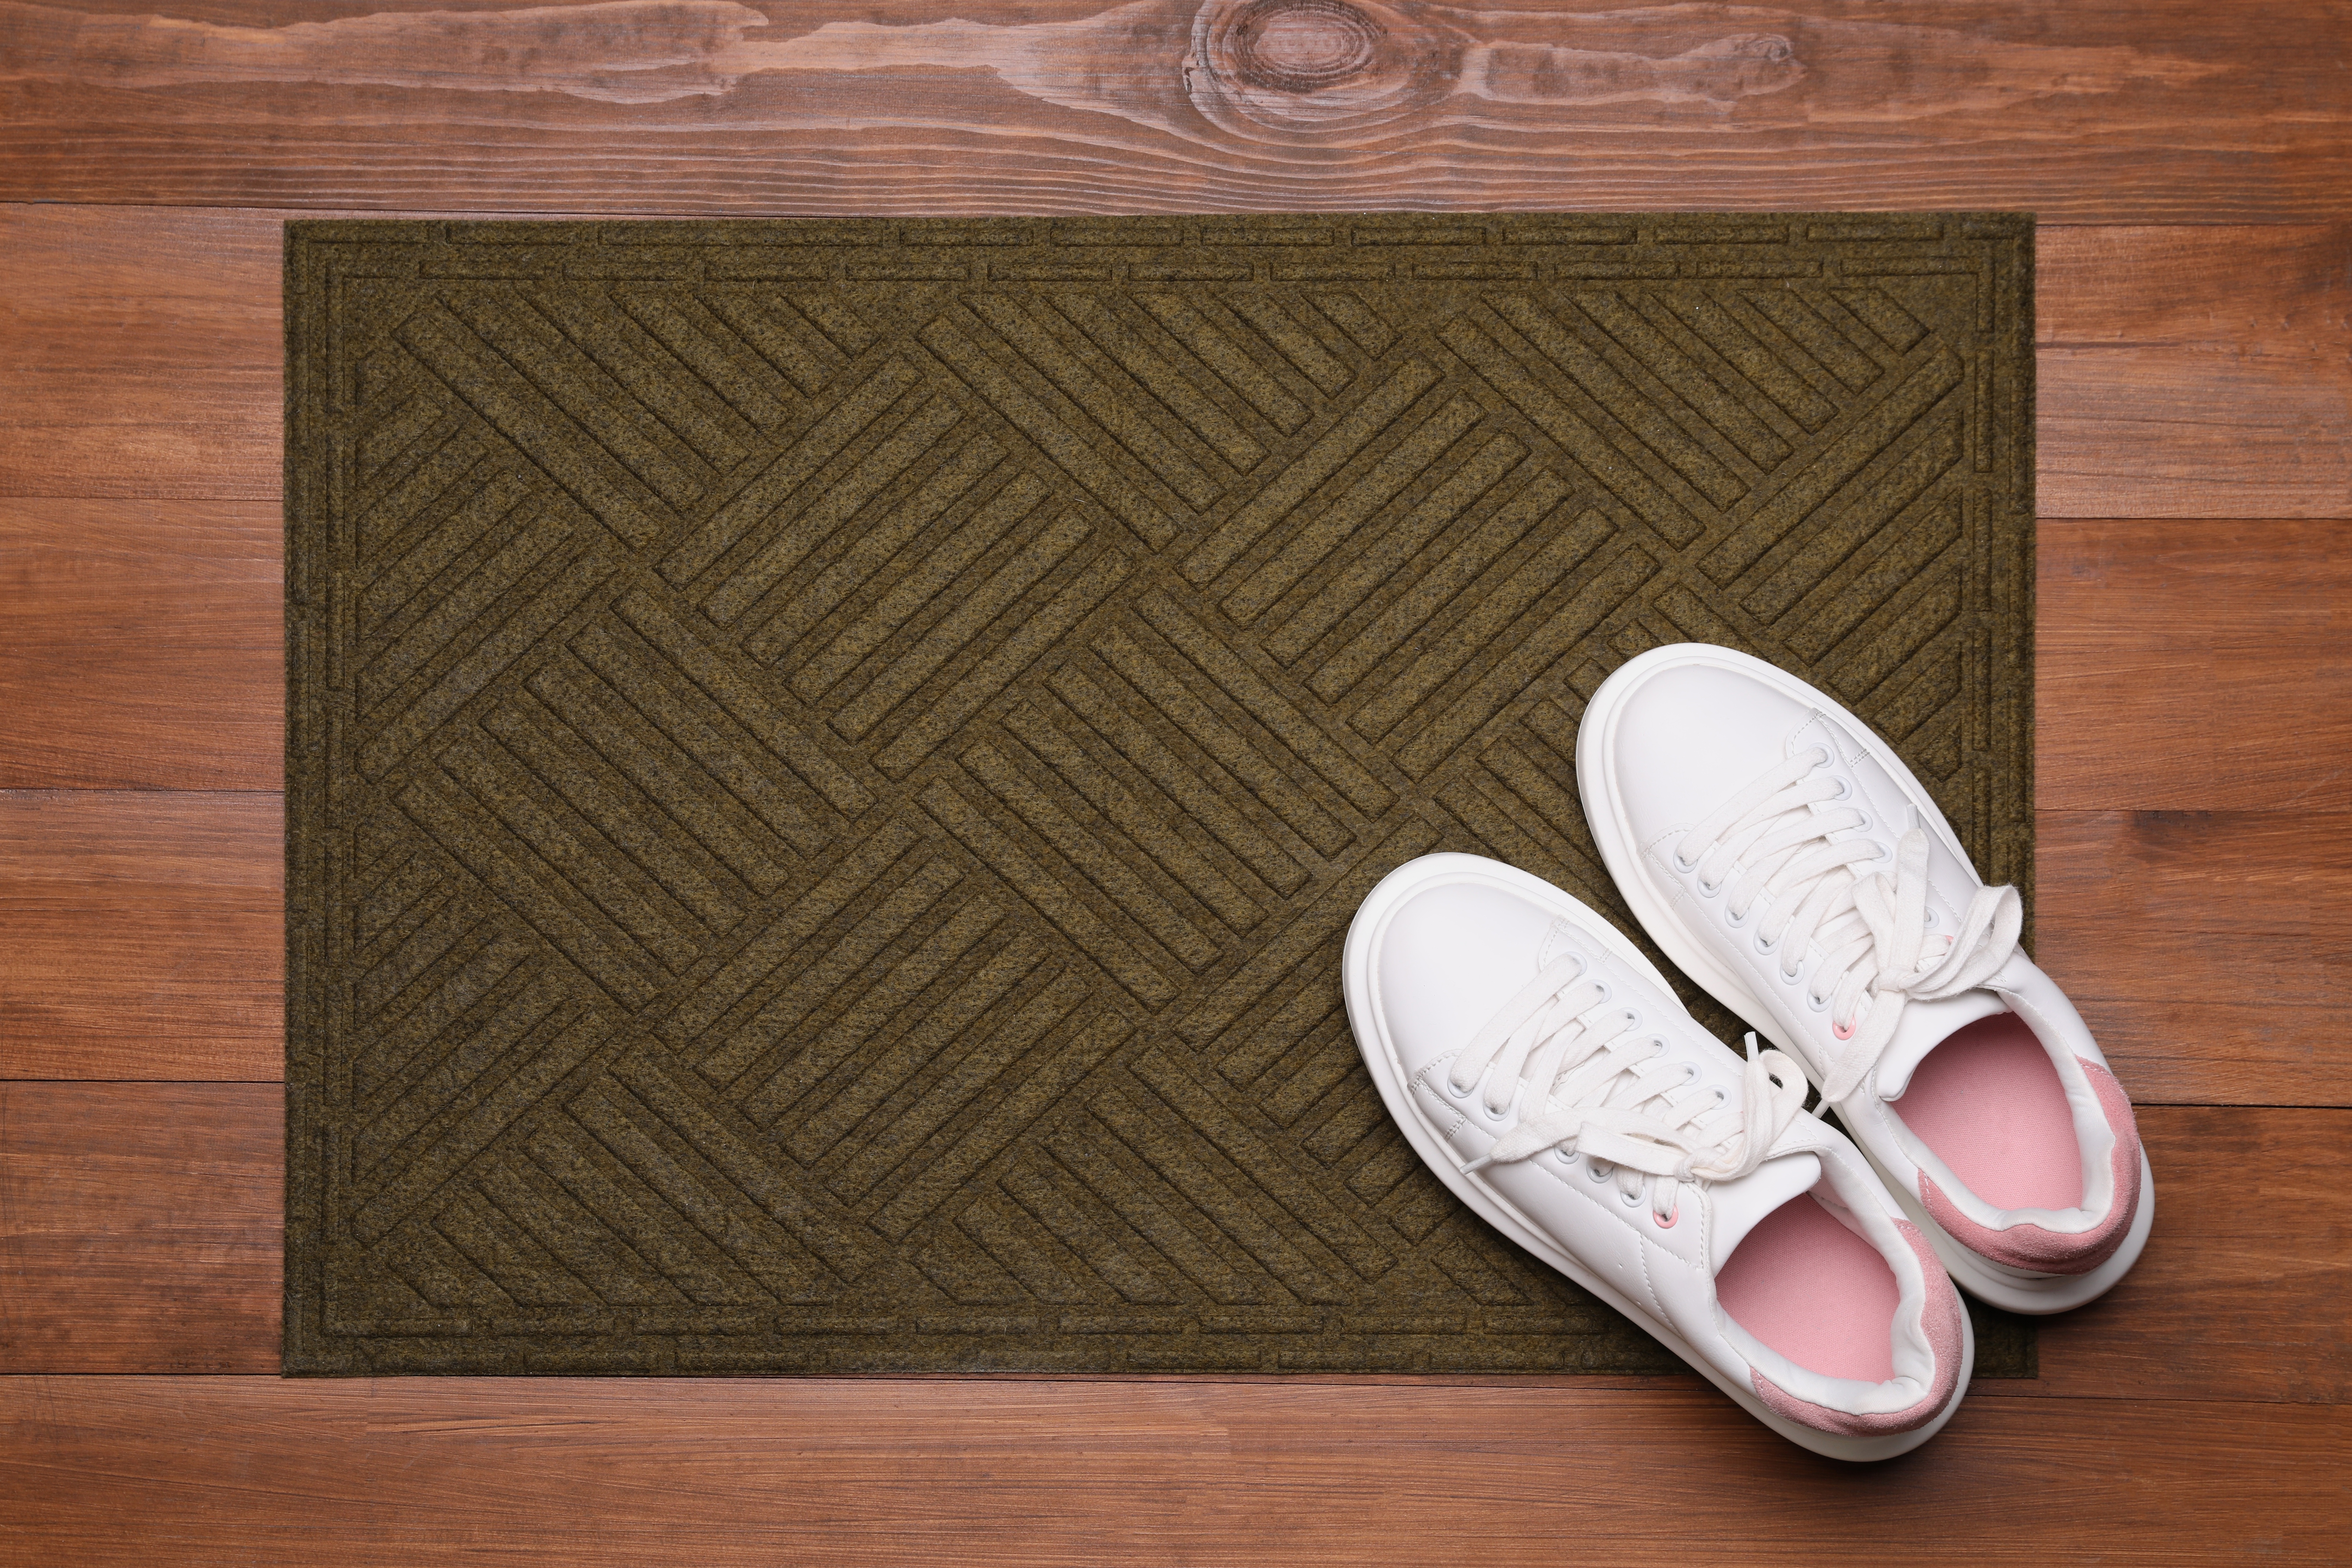 A pair of white sneakers are placed on a door mat lying on the wooden floor | Source: Shutterstock